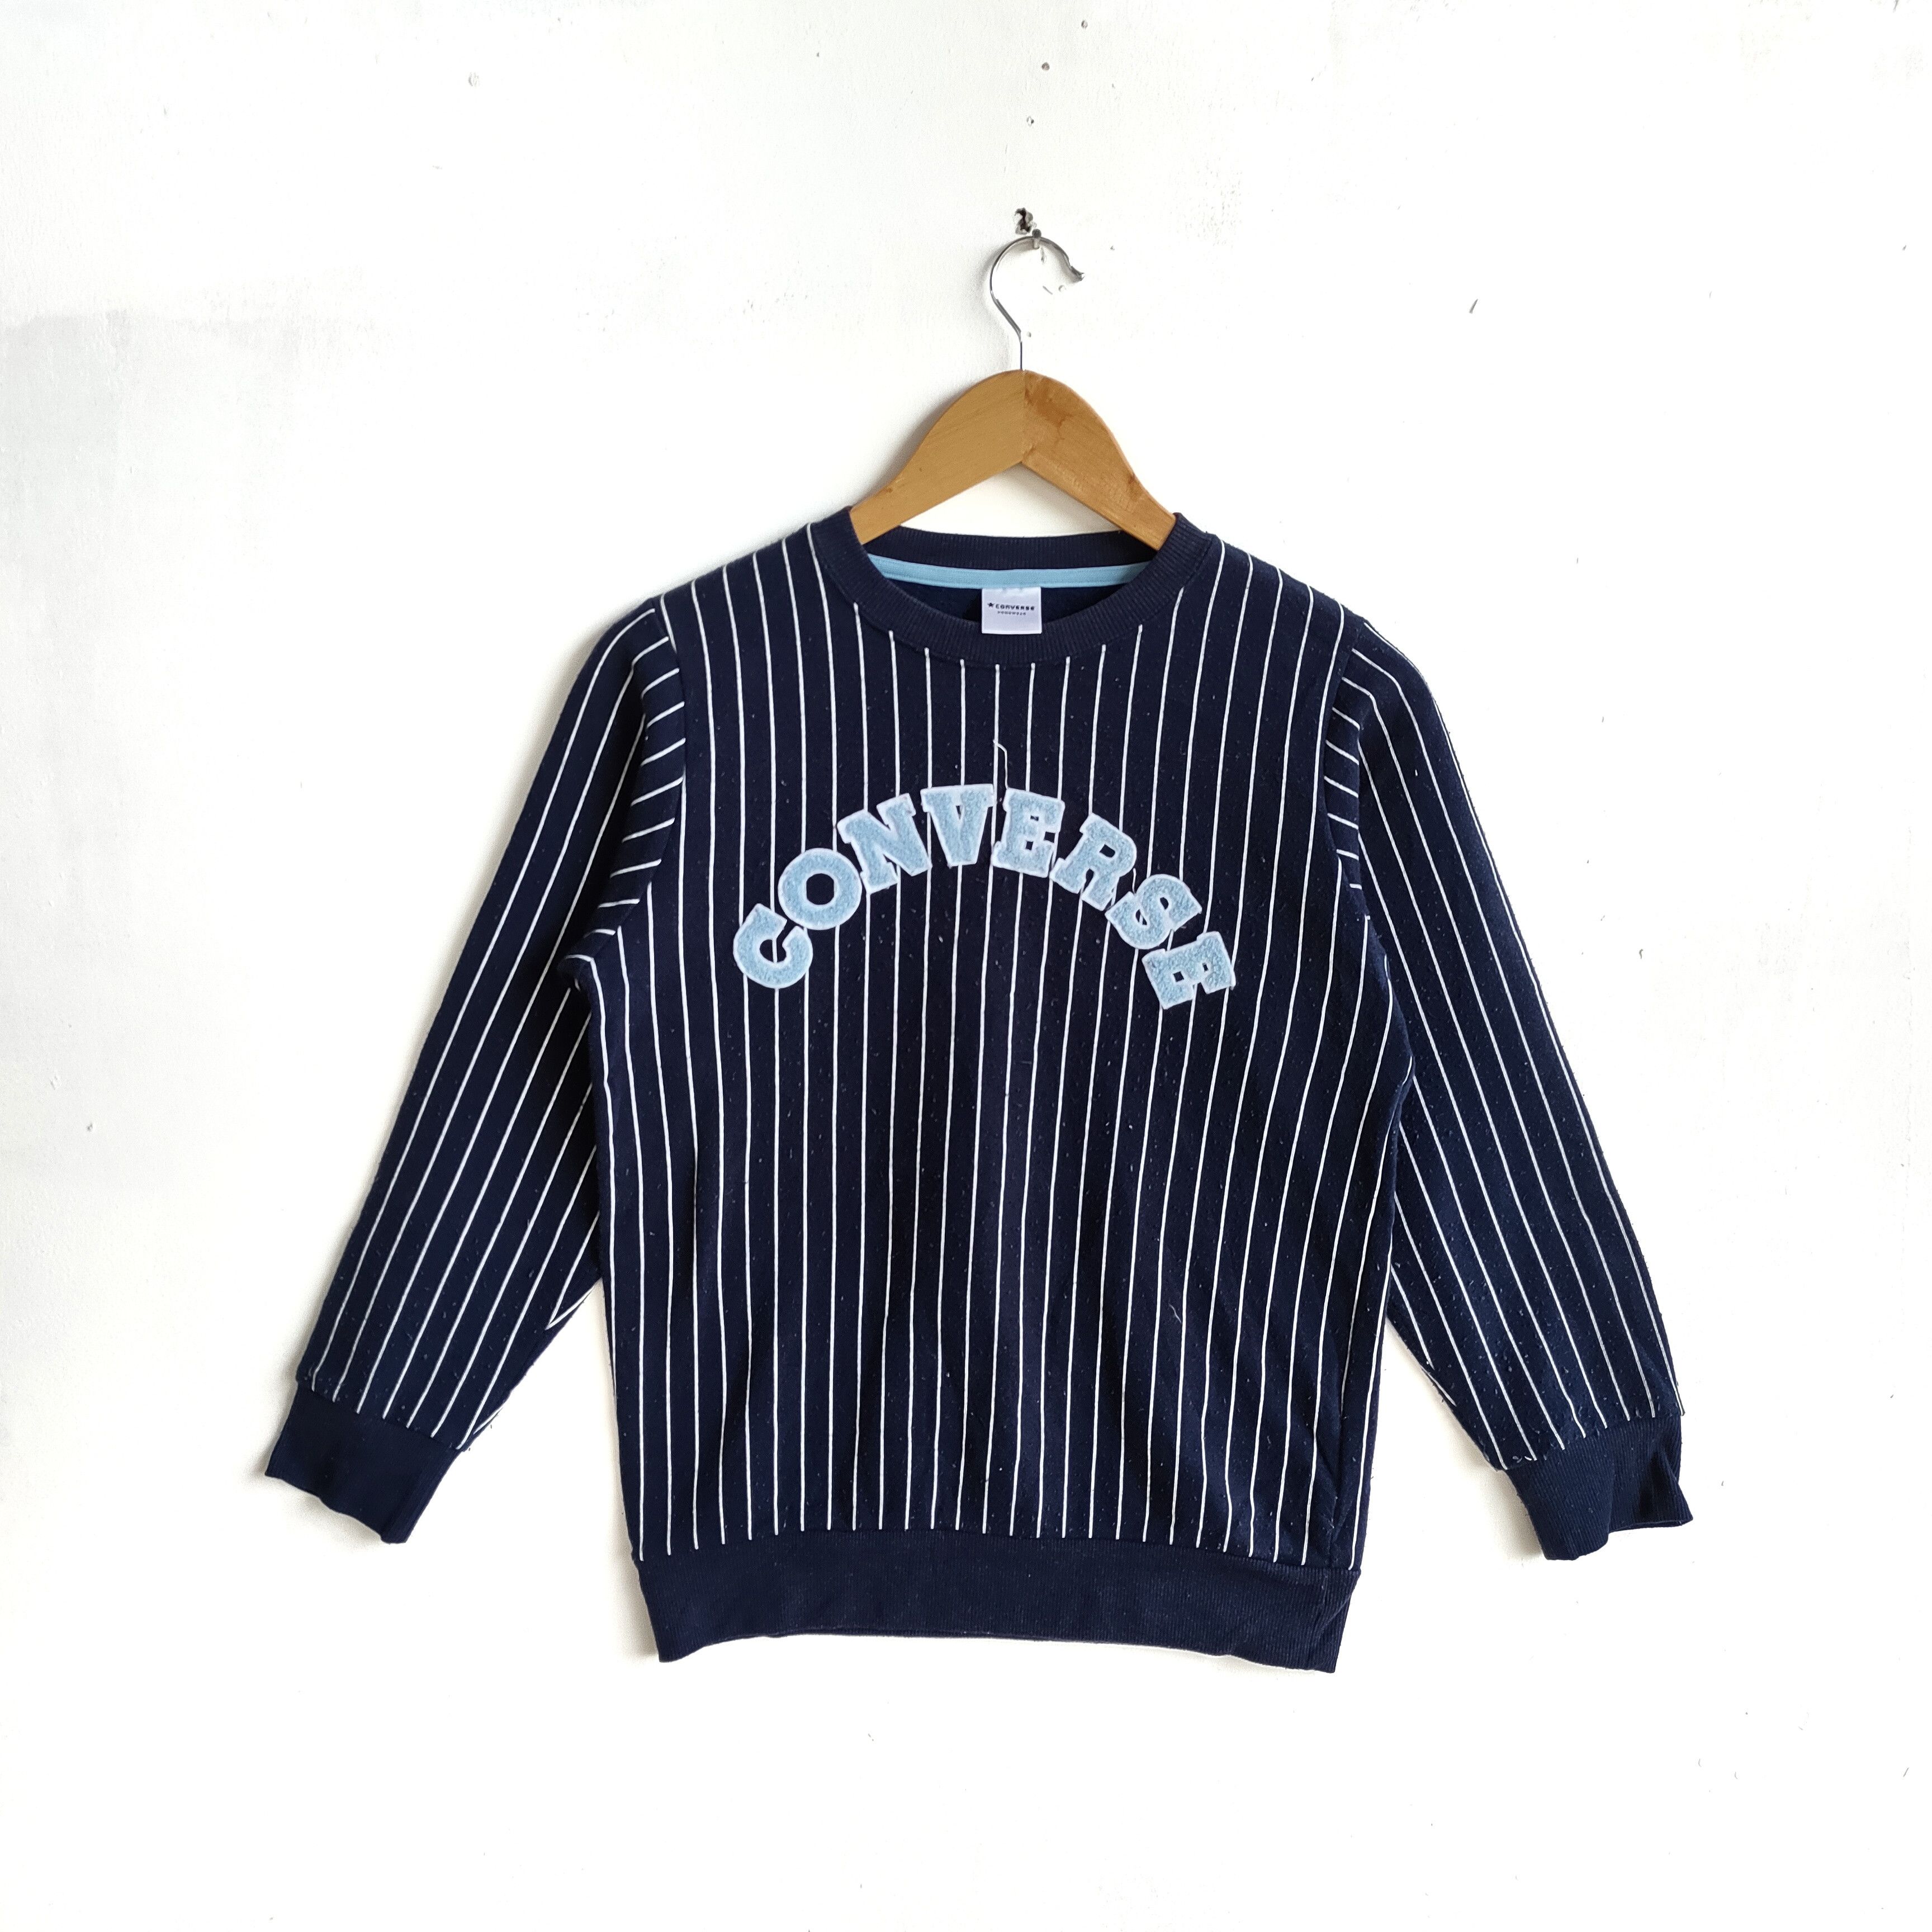 CONVERSE Big Embroidery Spell Out Stripe Pattern Sweatshirt - 1